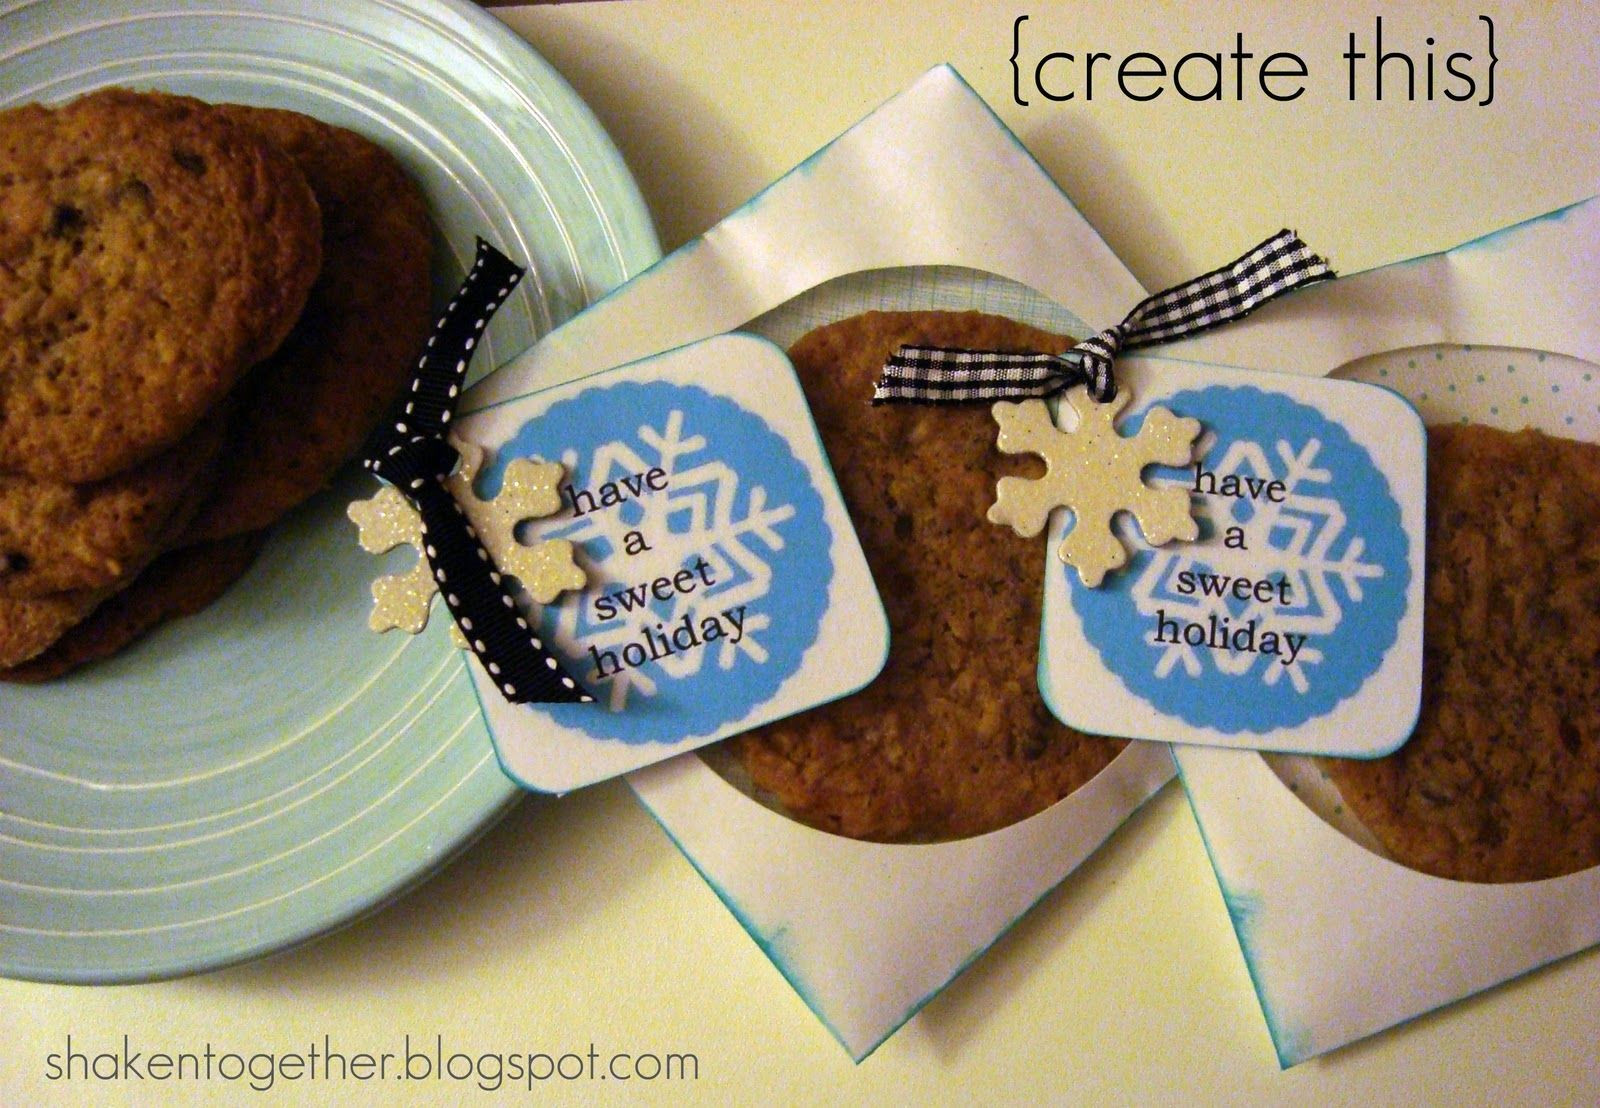 Gifts For Large Groups
 Pin on Gift ideas for Groups